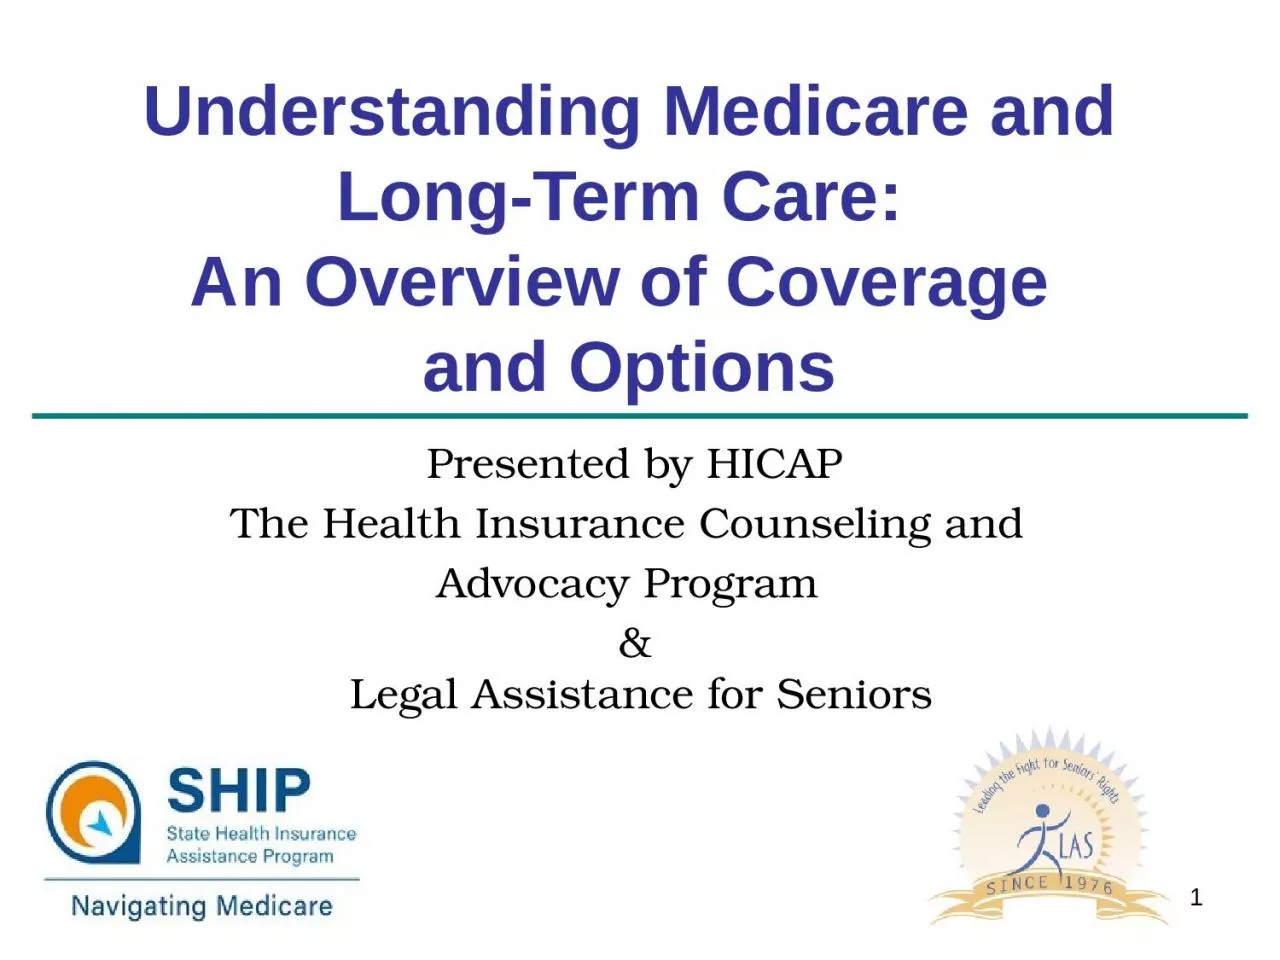 Understanding Medicare and Long-Term Care: